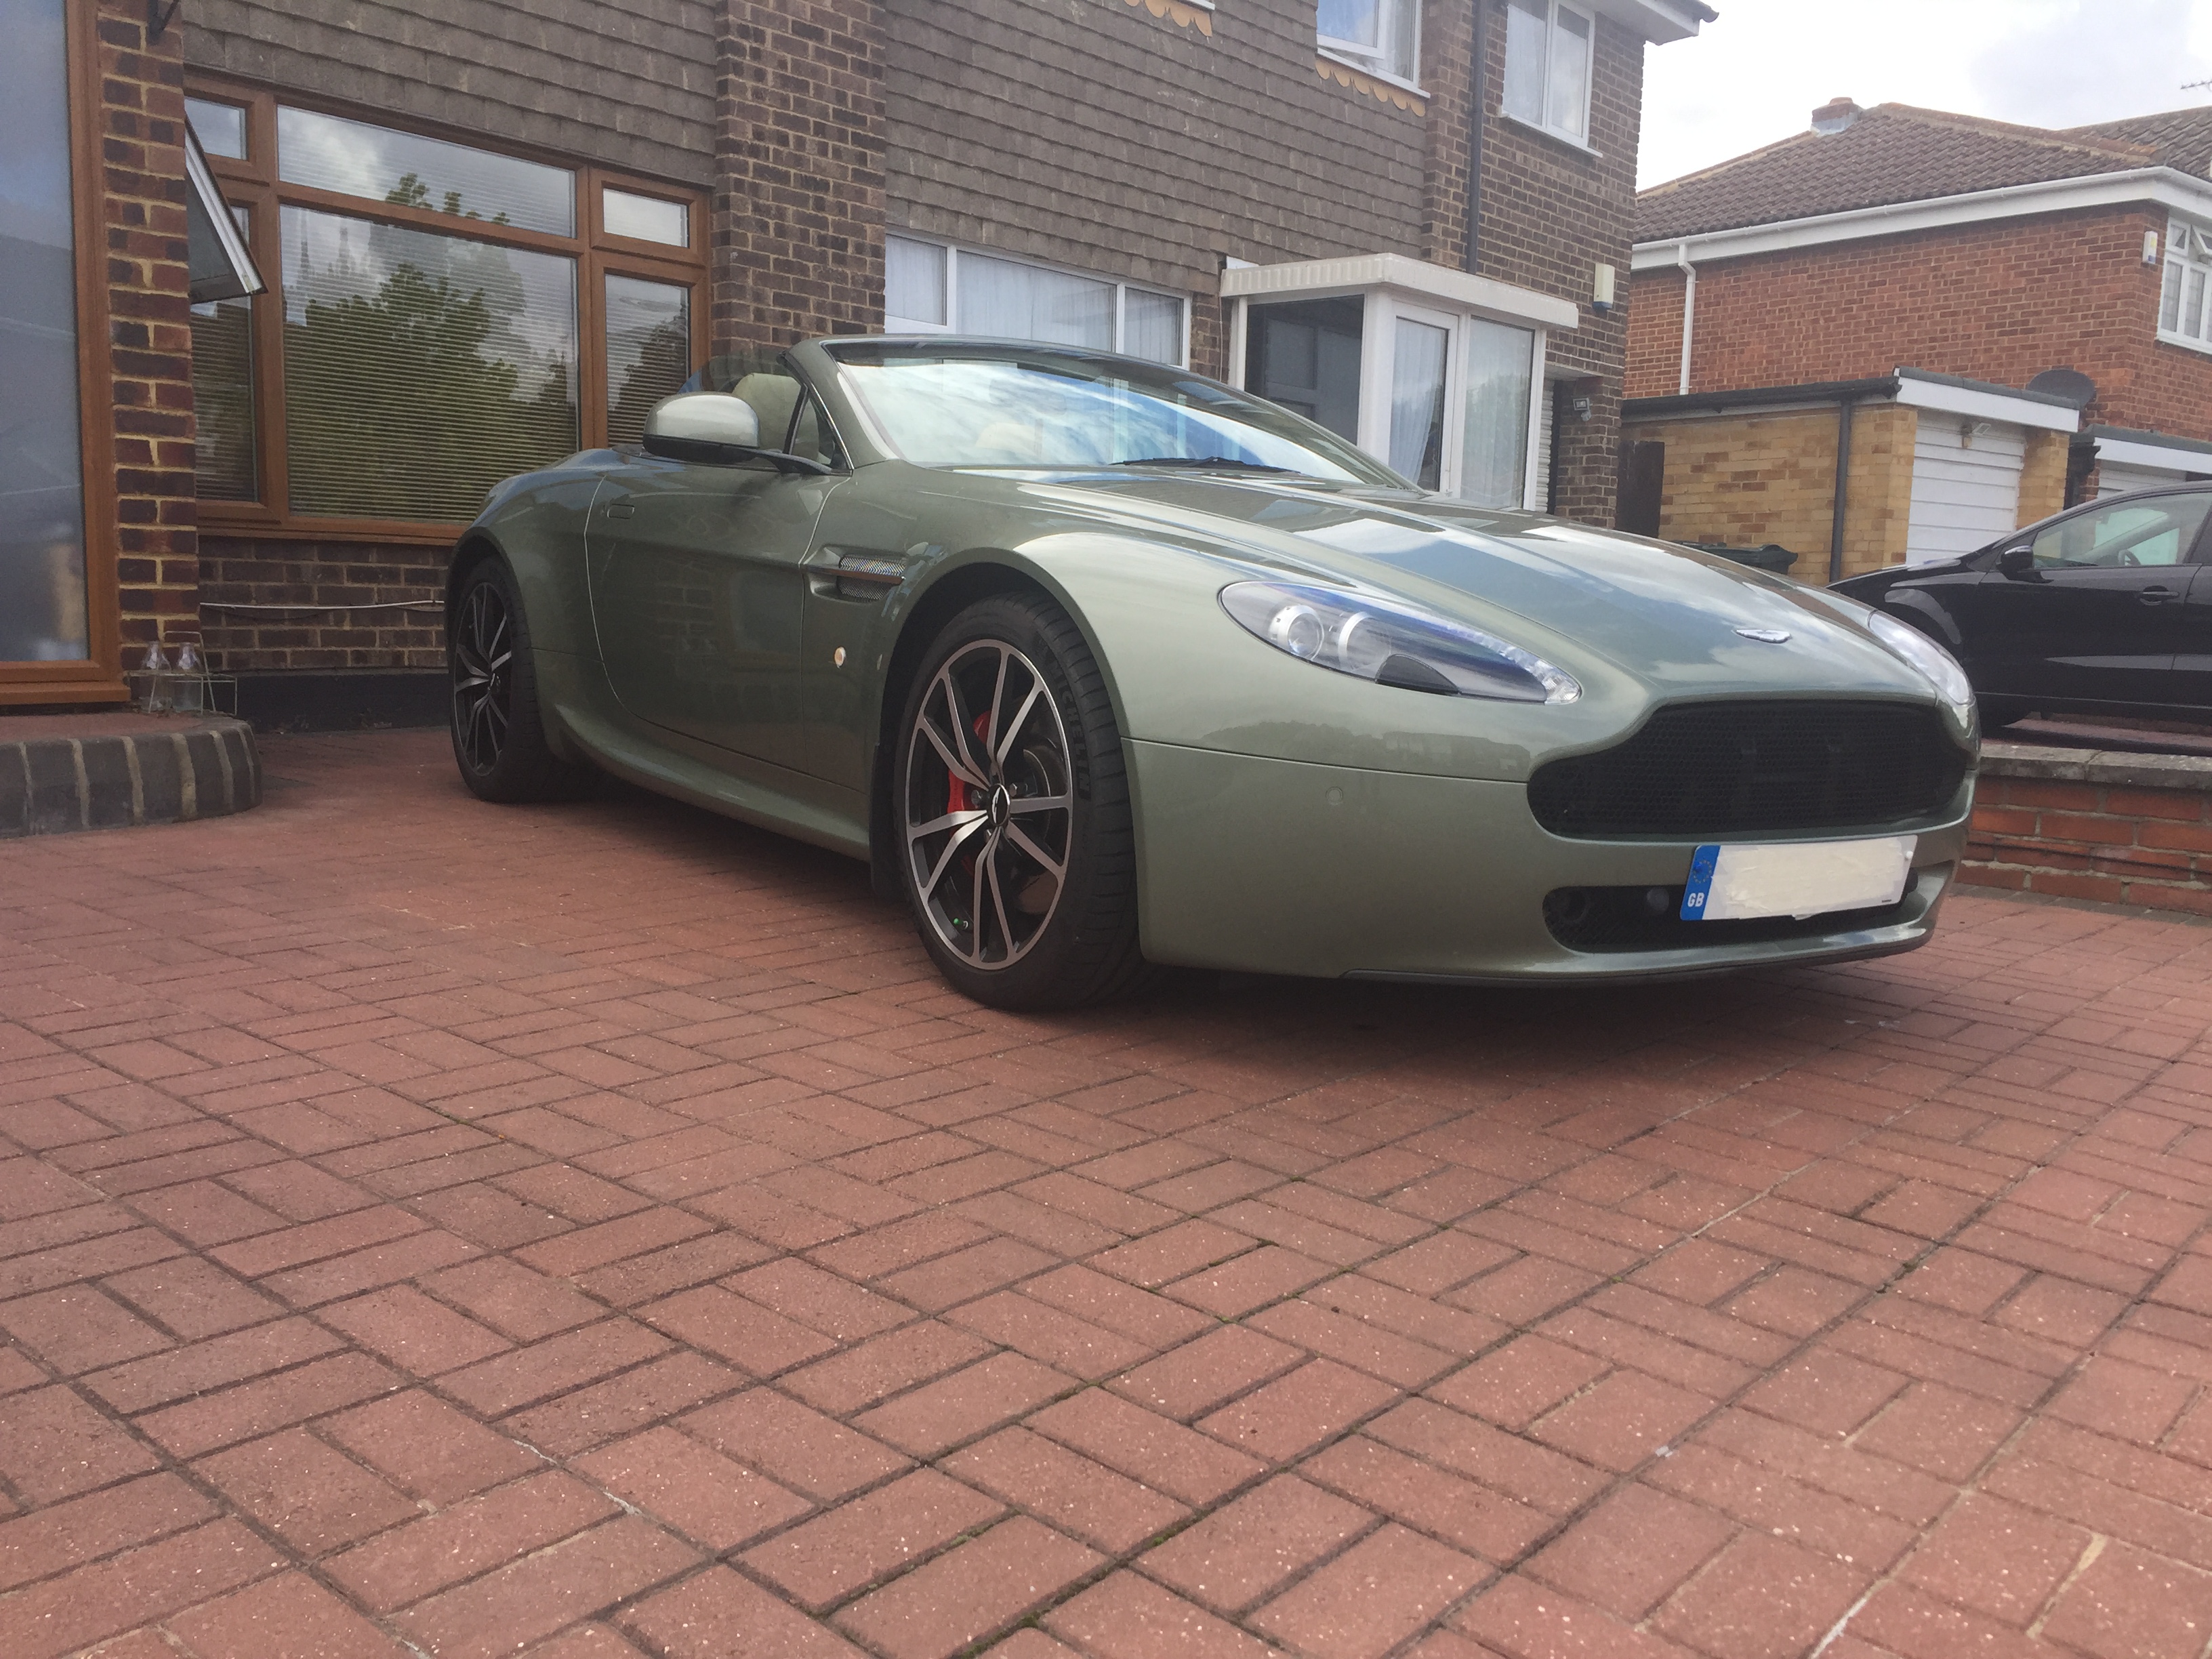 So what have you done with your Aston today? - Page 450 - Aston Martin - PistonHeads